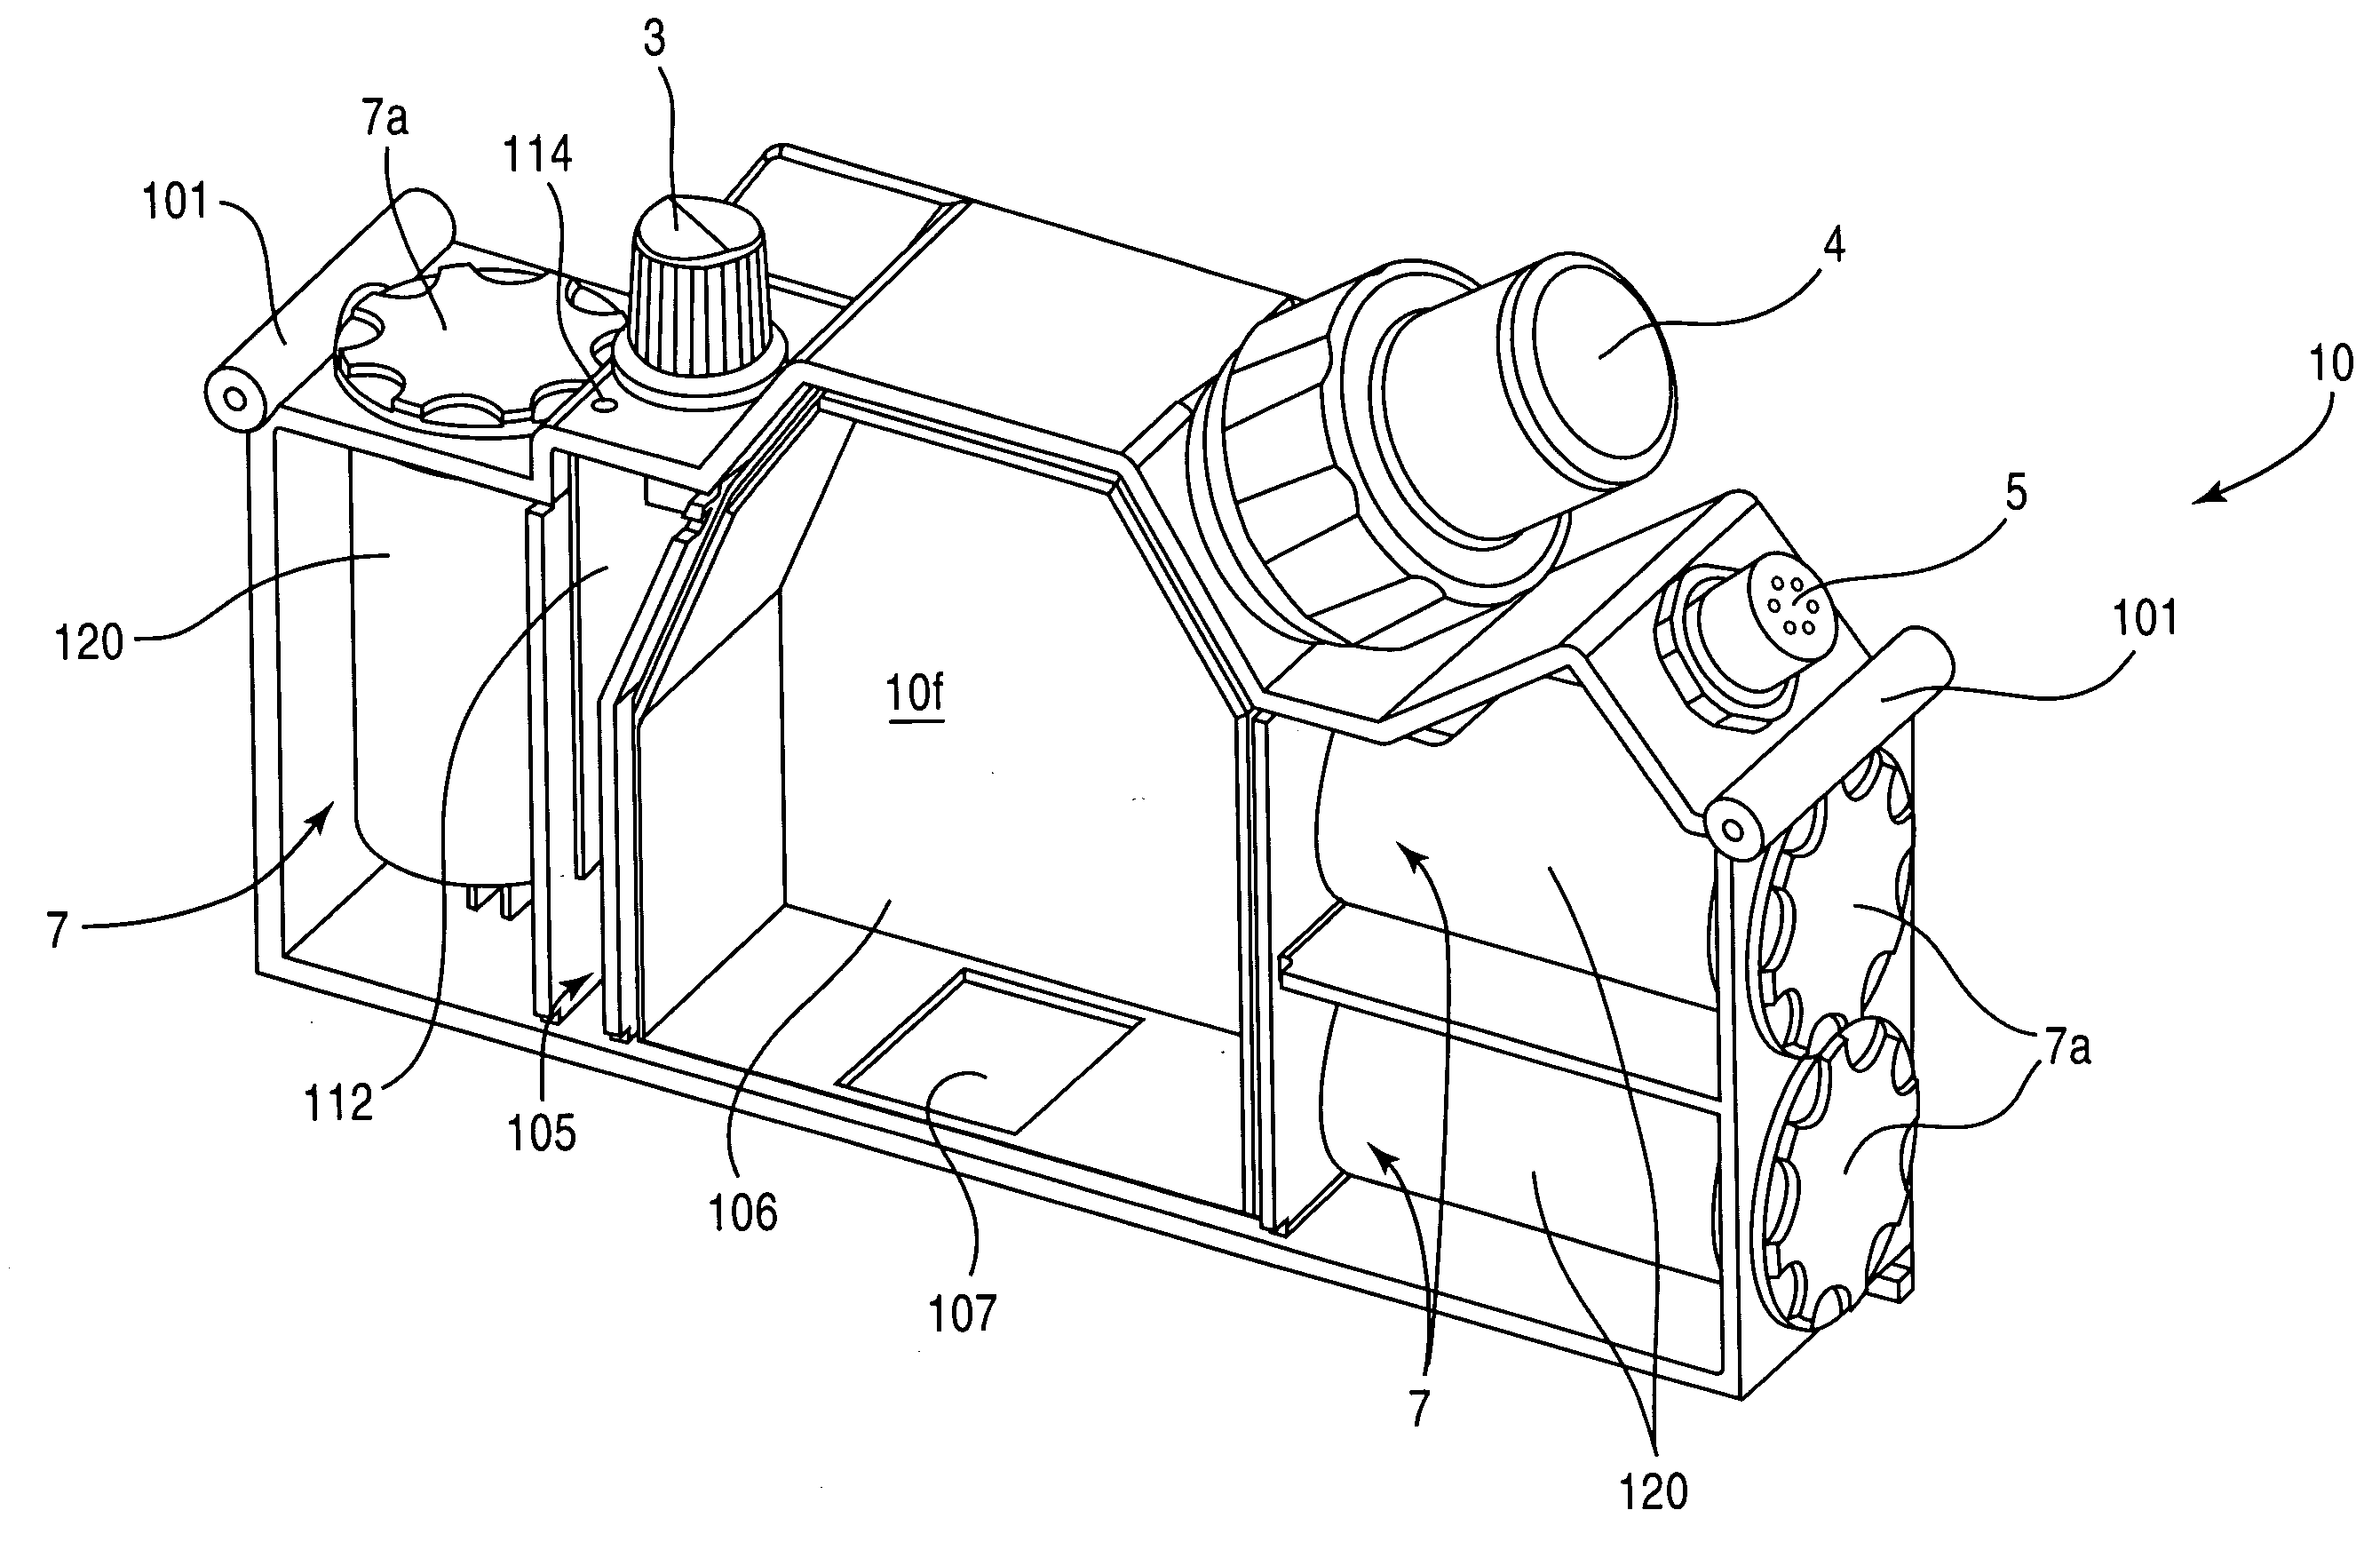 Thin profile air purifying blower unit and filter cartridges, and method of use